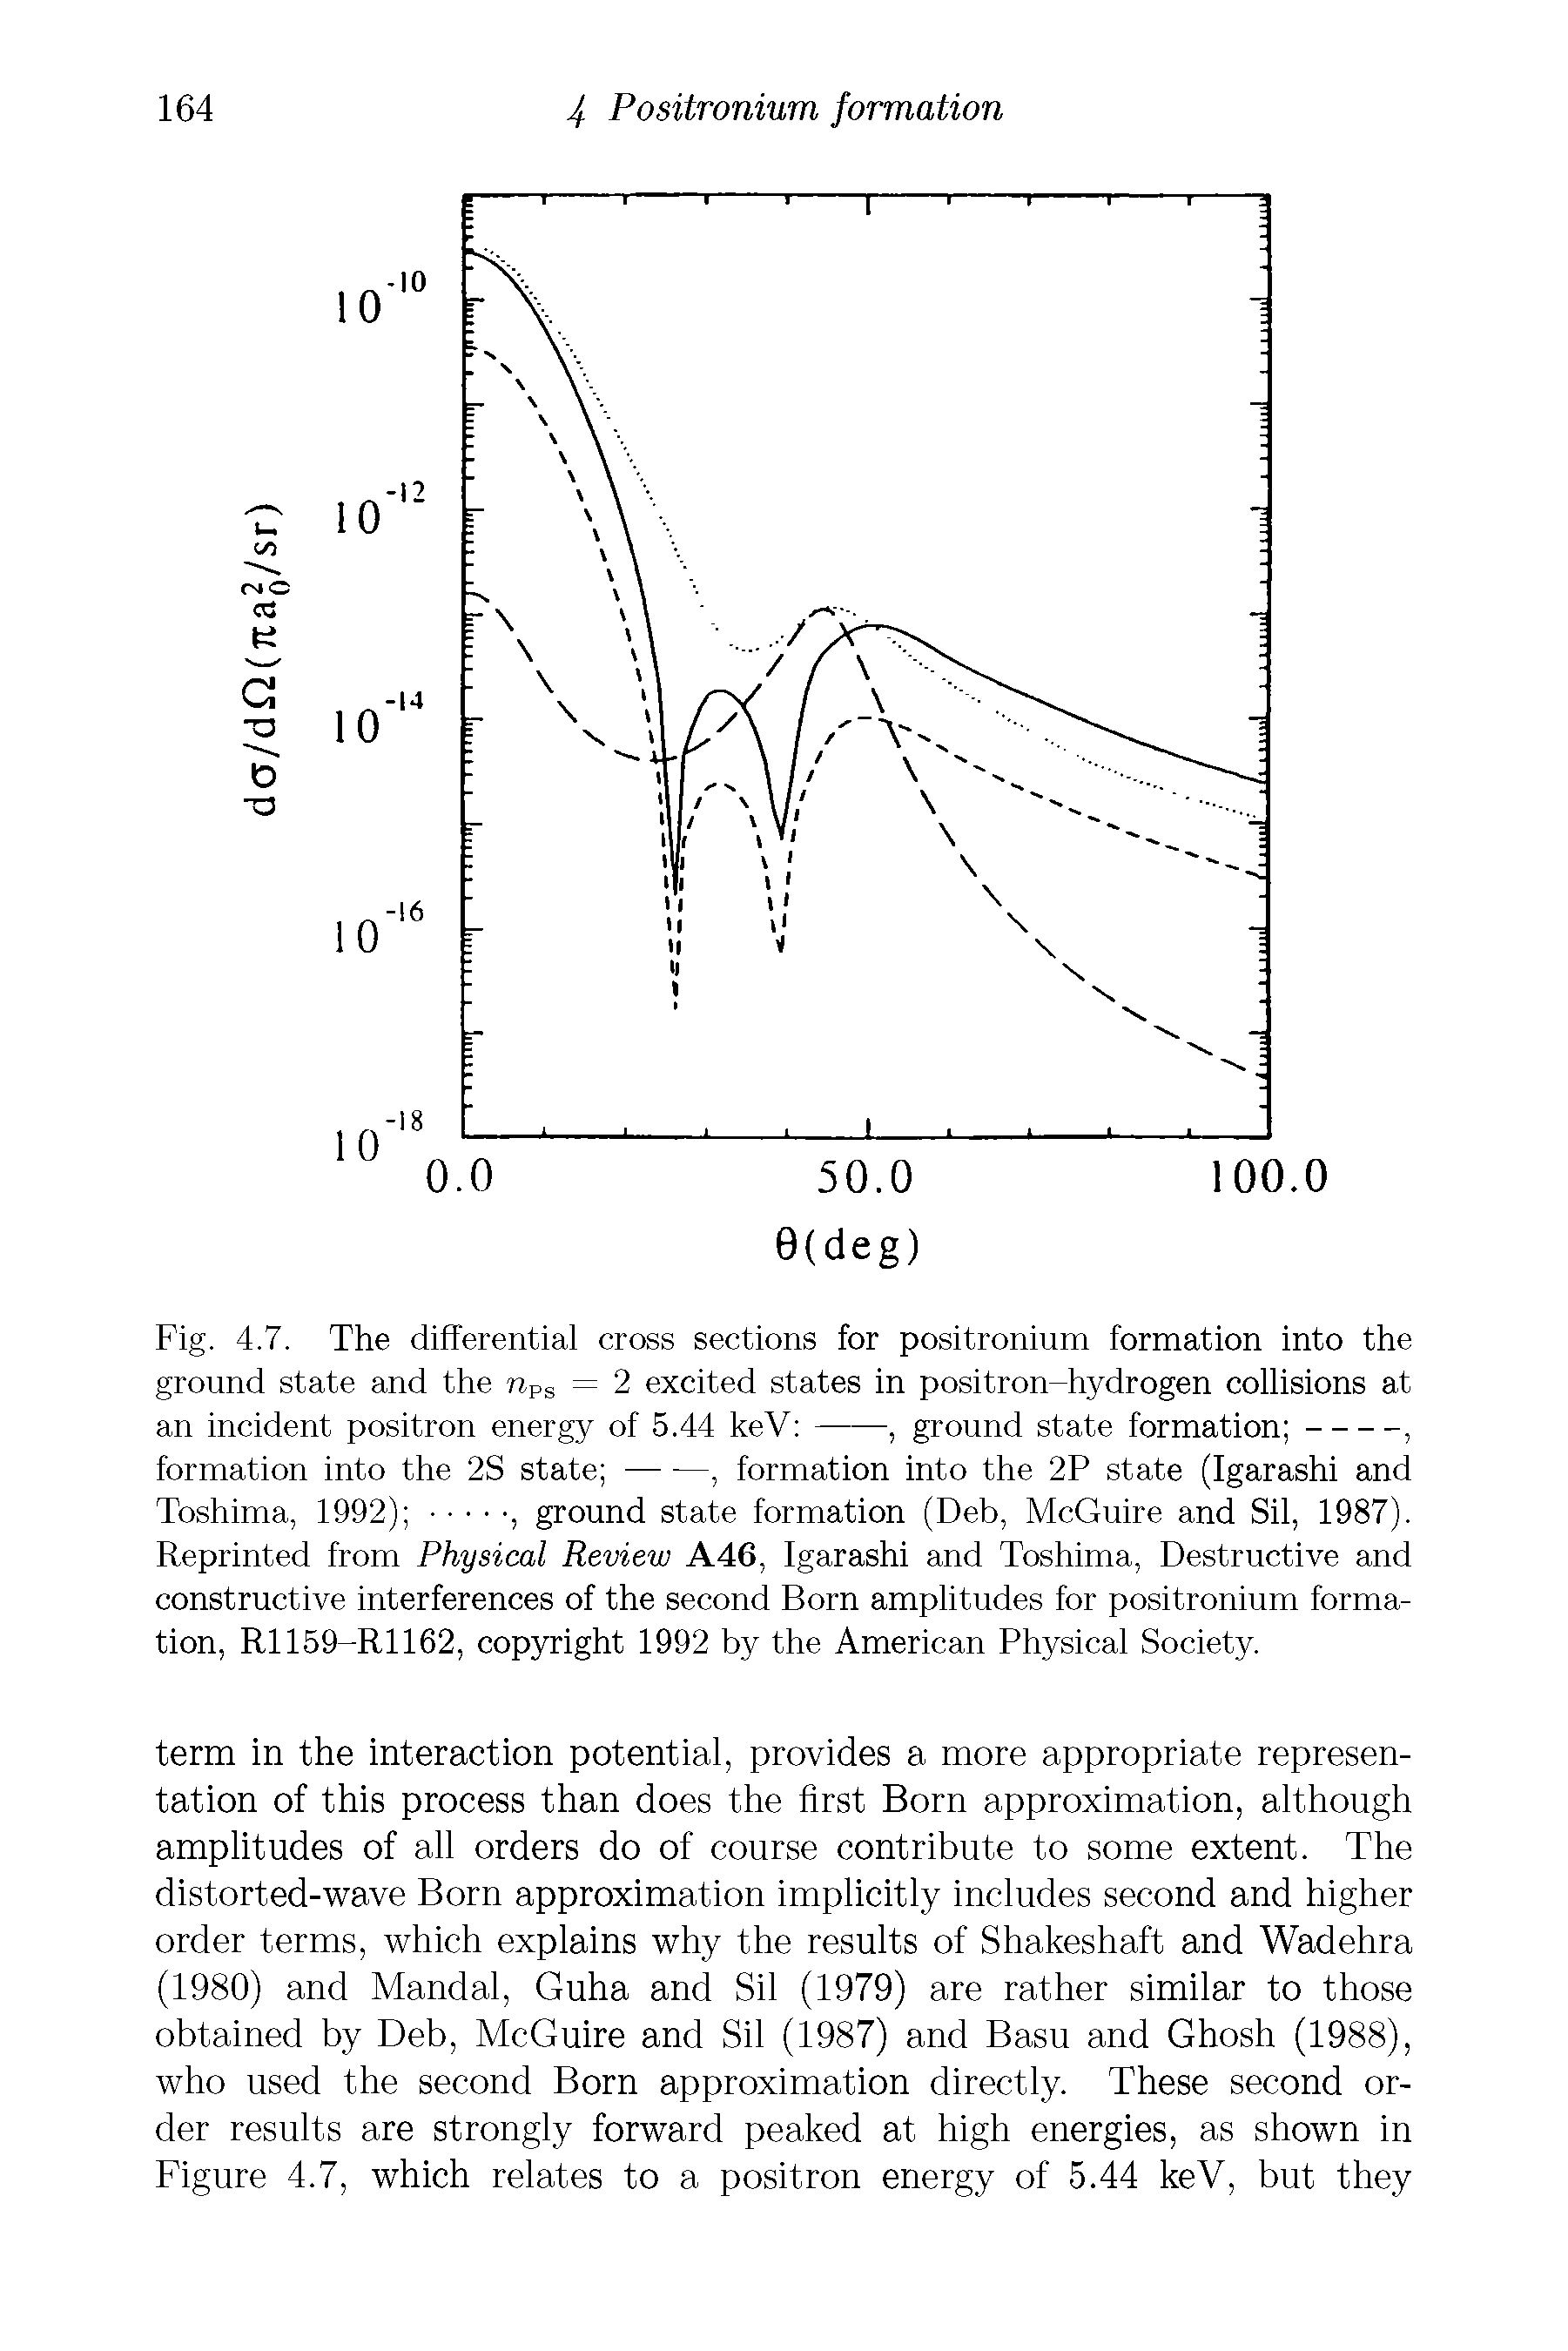 Fig. 4.7. The differential cross sections for positronium formation into the ground state and the nPS = 2 excited states in positron-hydrogen collisions at...